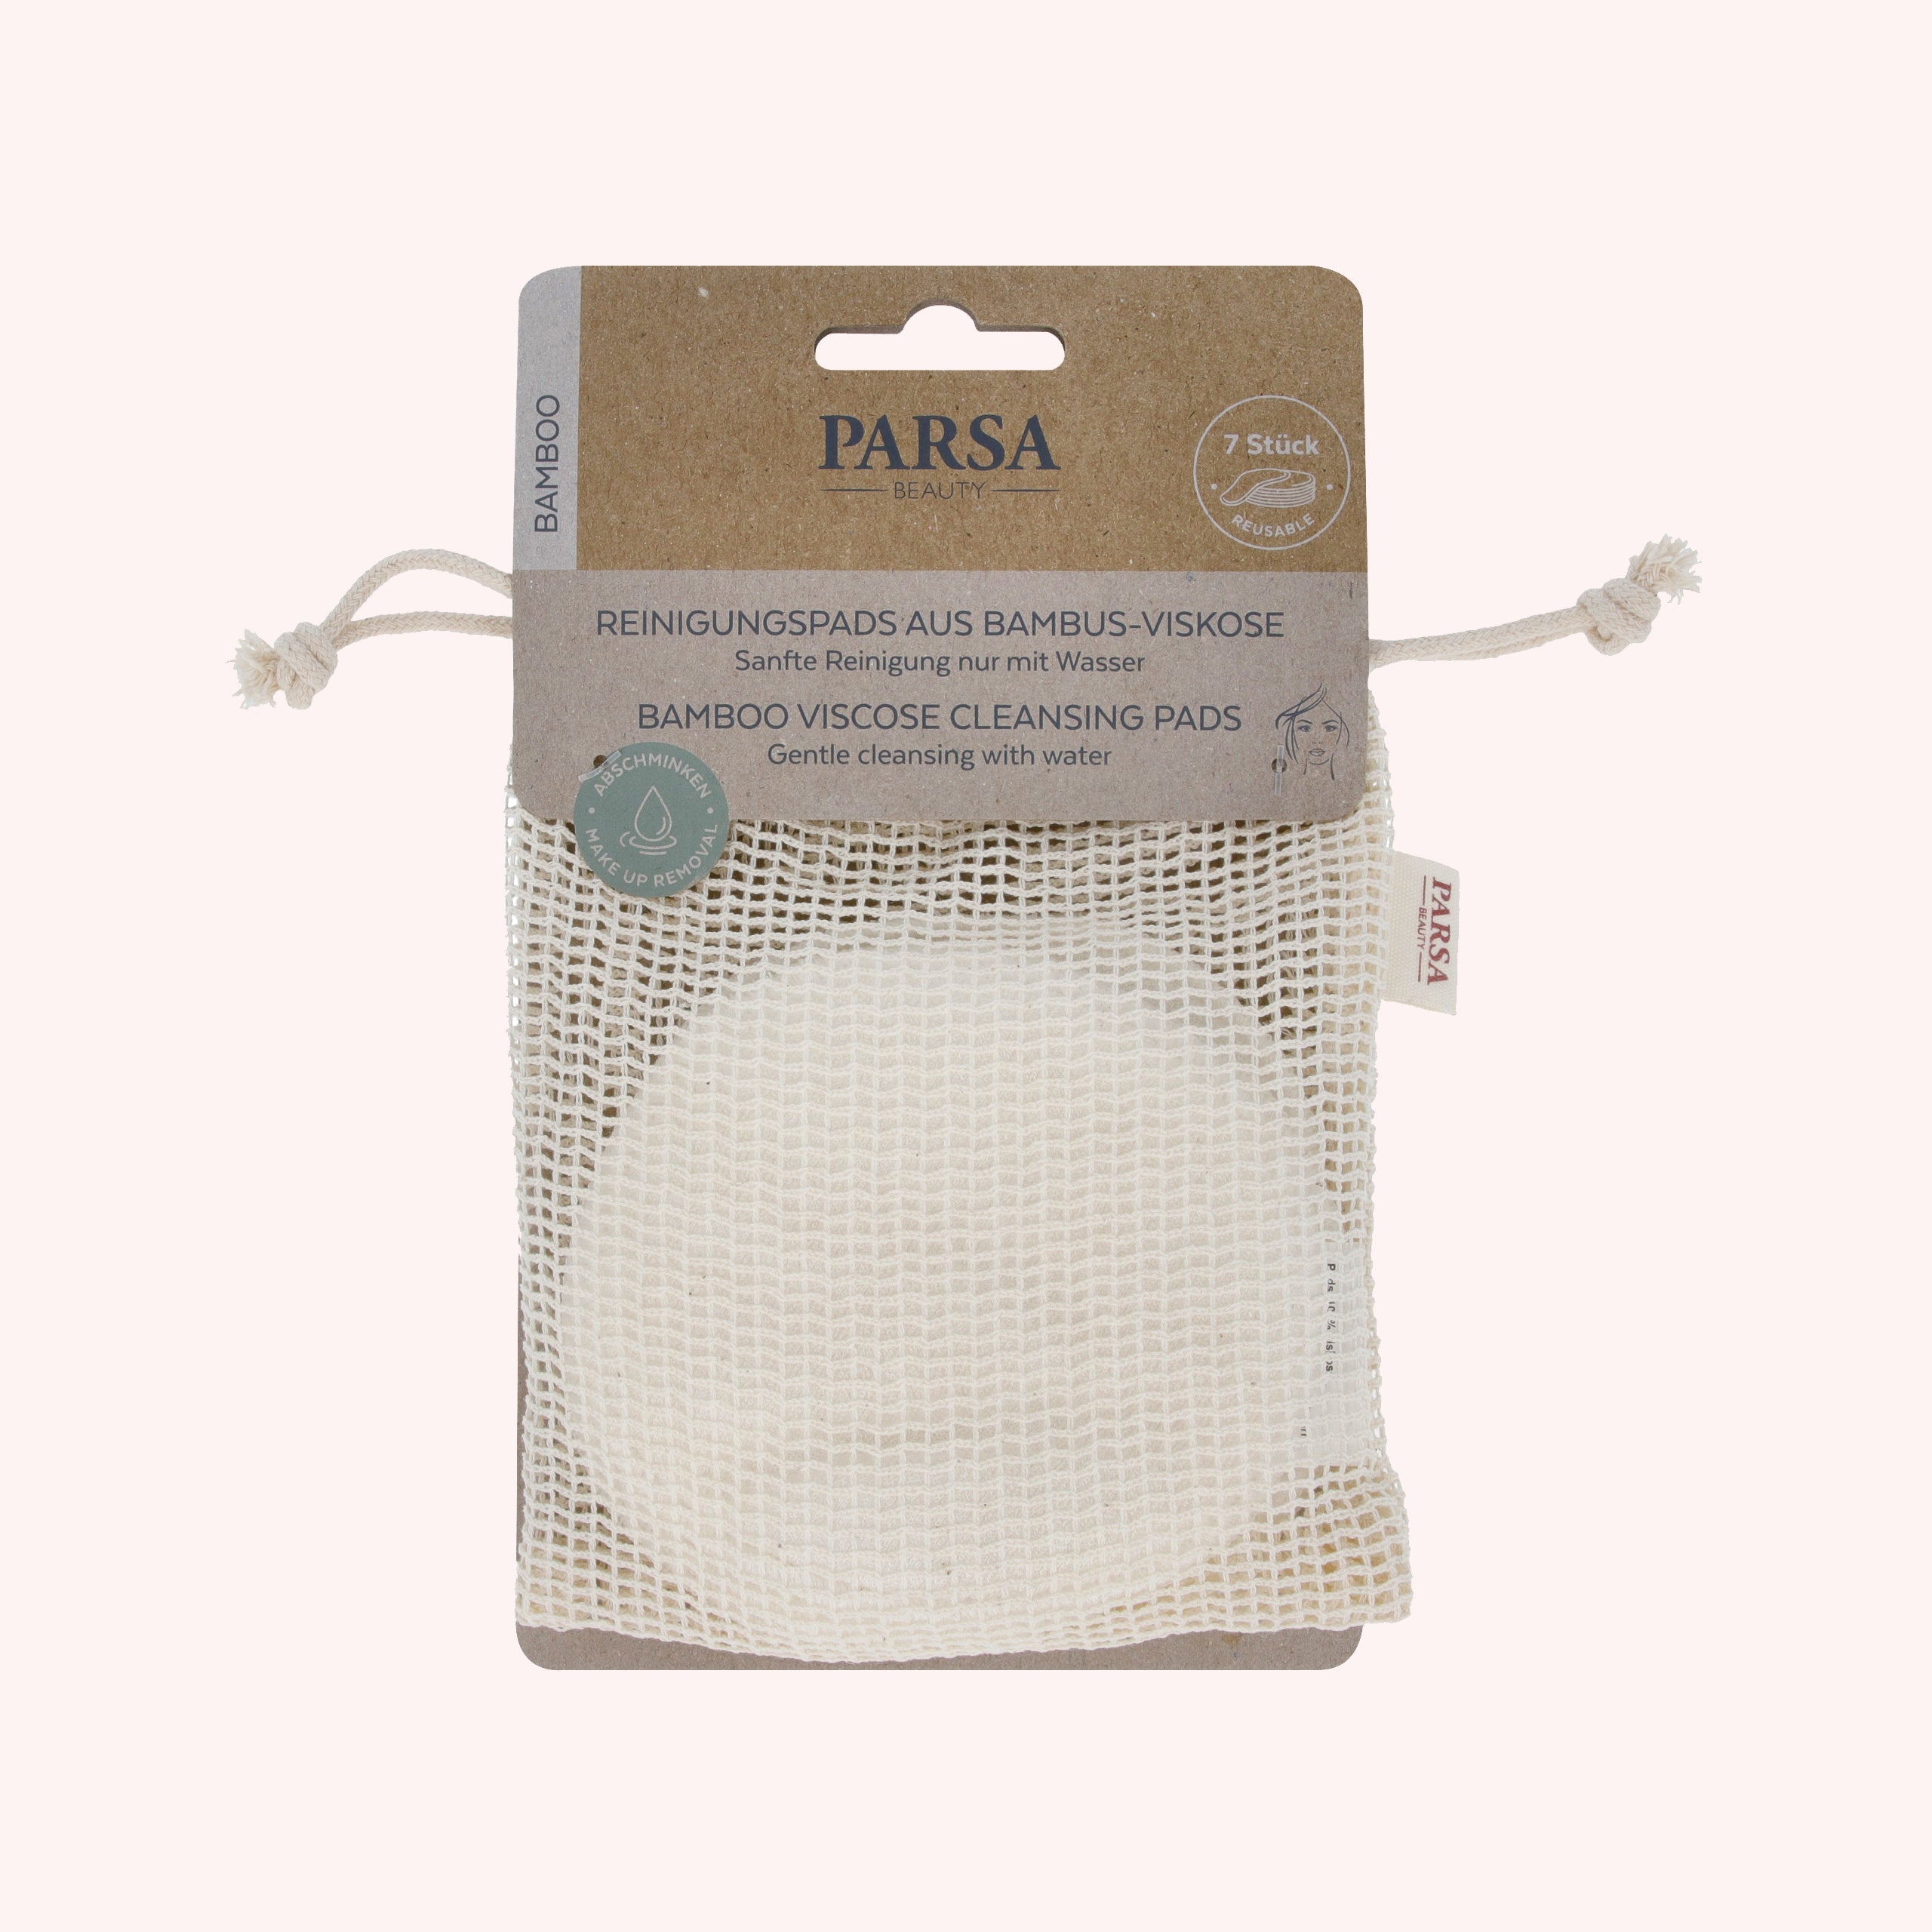 Bamboo Viscose Cleansing Pads